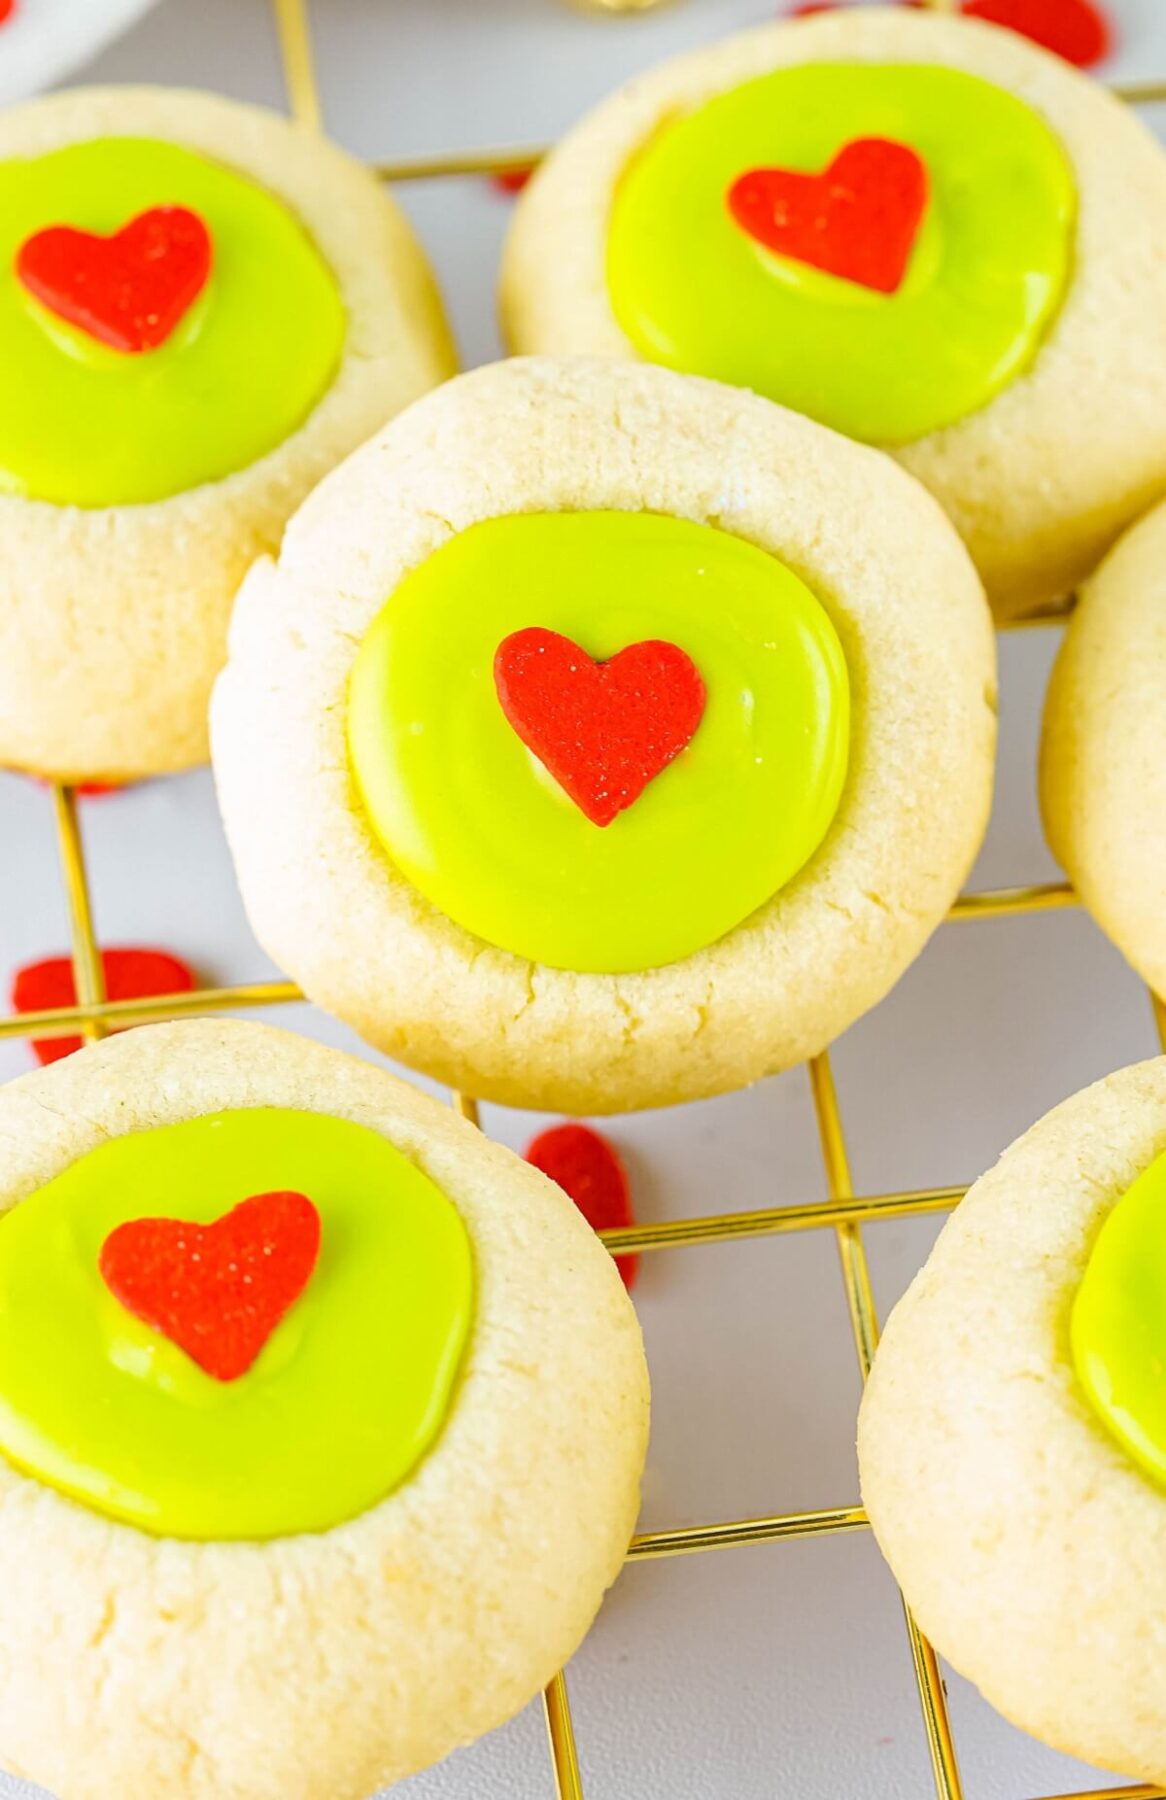 Golden baked thumbprint grinch cookies filled with bright creamy green candy melts and decorated with a red heart on a wire cooling rack.